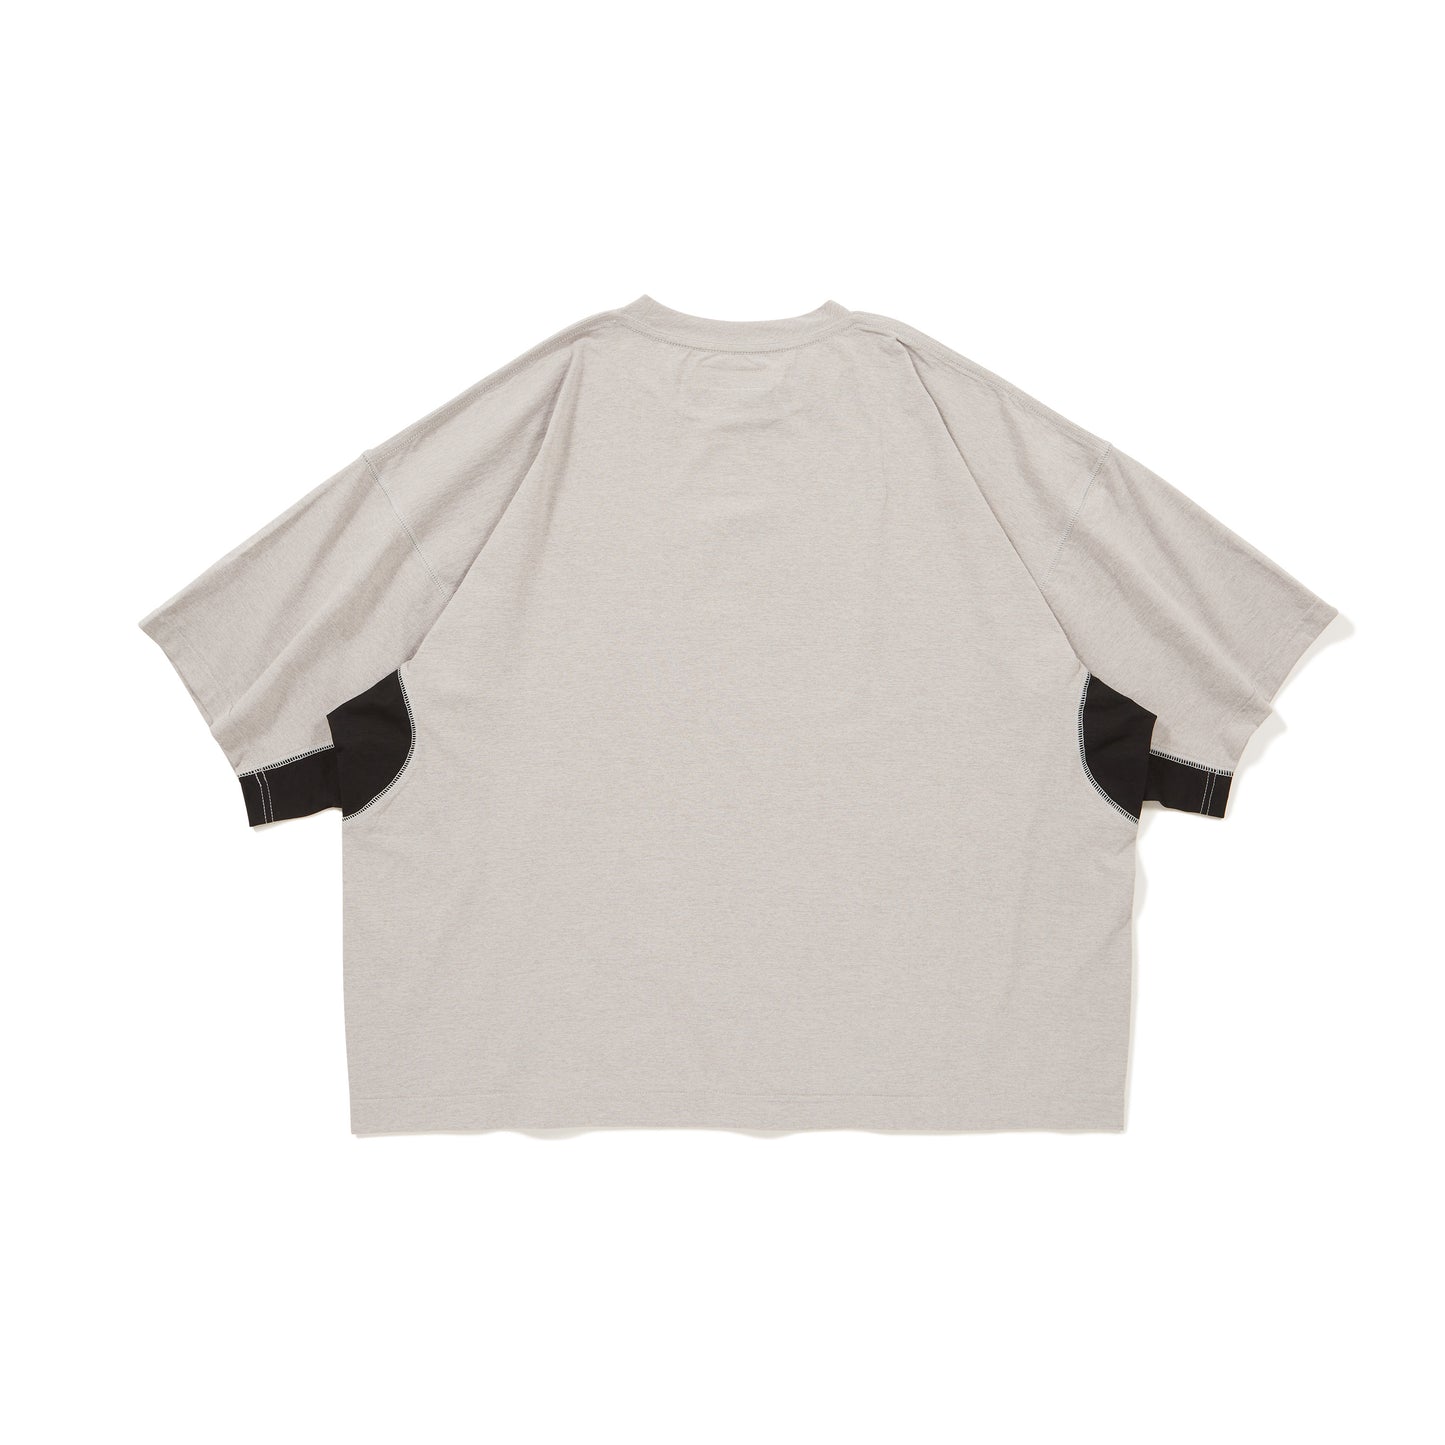 Traning S/S Top (Charcoal)